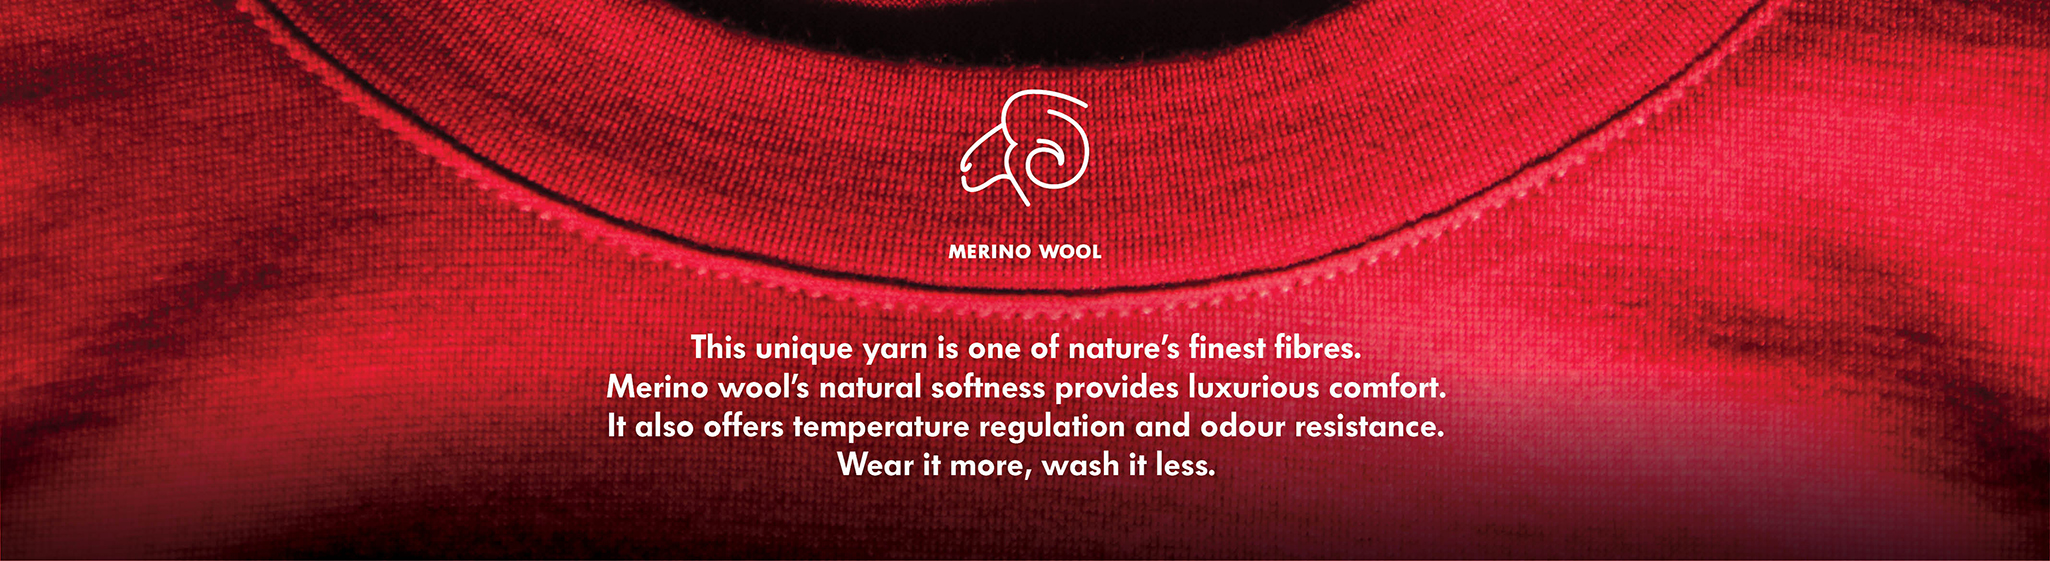 Merino Wool, One of nature's finest fibres, merino wool is naturally light, temperature regulating and odour resistant. Better for the environment - wear it more, wash it less.